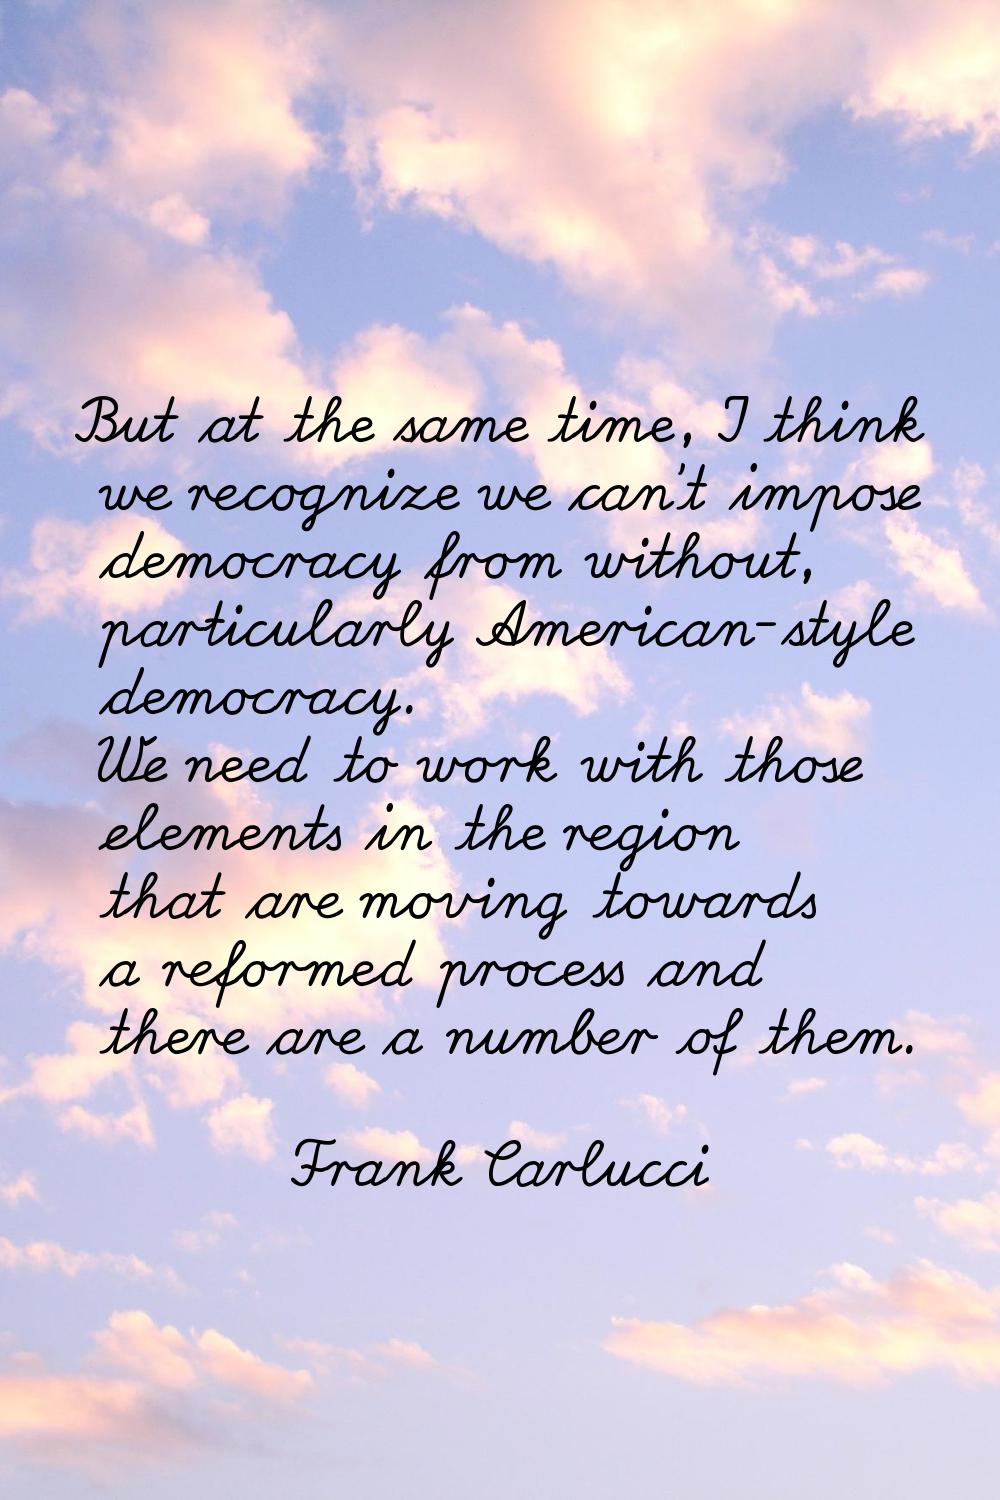 But at the same time, I think we recognize we can't impose democracy from without, particularly Ame